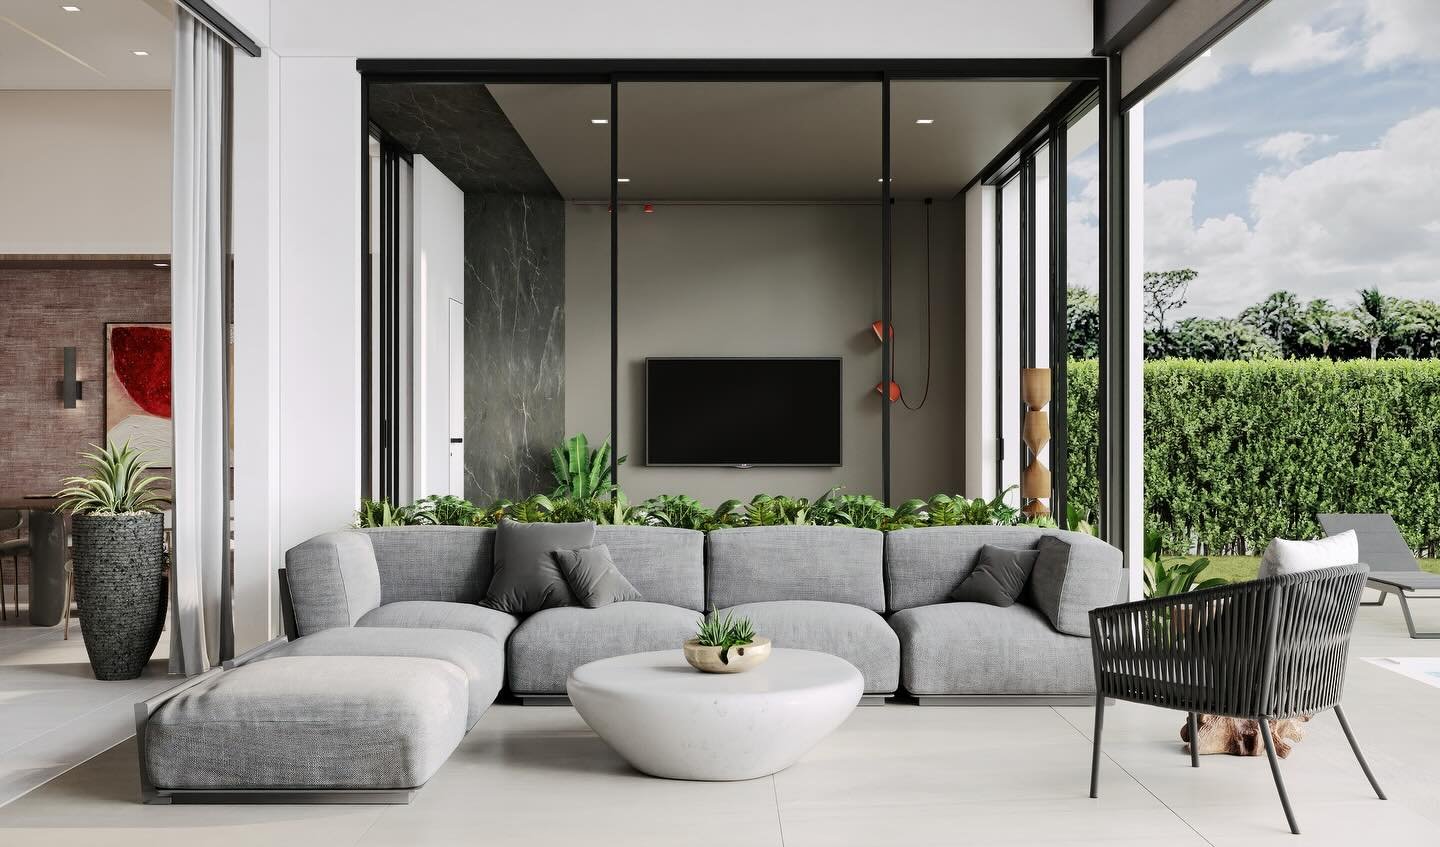 Relax in style while staying connected to the world outside. 

#marionpigeotdesigns #interiordesigner #moderninterior #bocaratoninteriordesign #interiorinspiration #designmiami #backyards #modernbathroom #indoorliving #luxuryhome #designlovers #flori